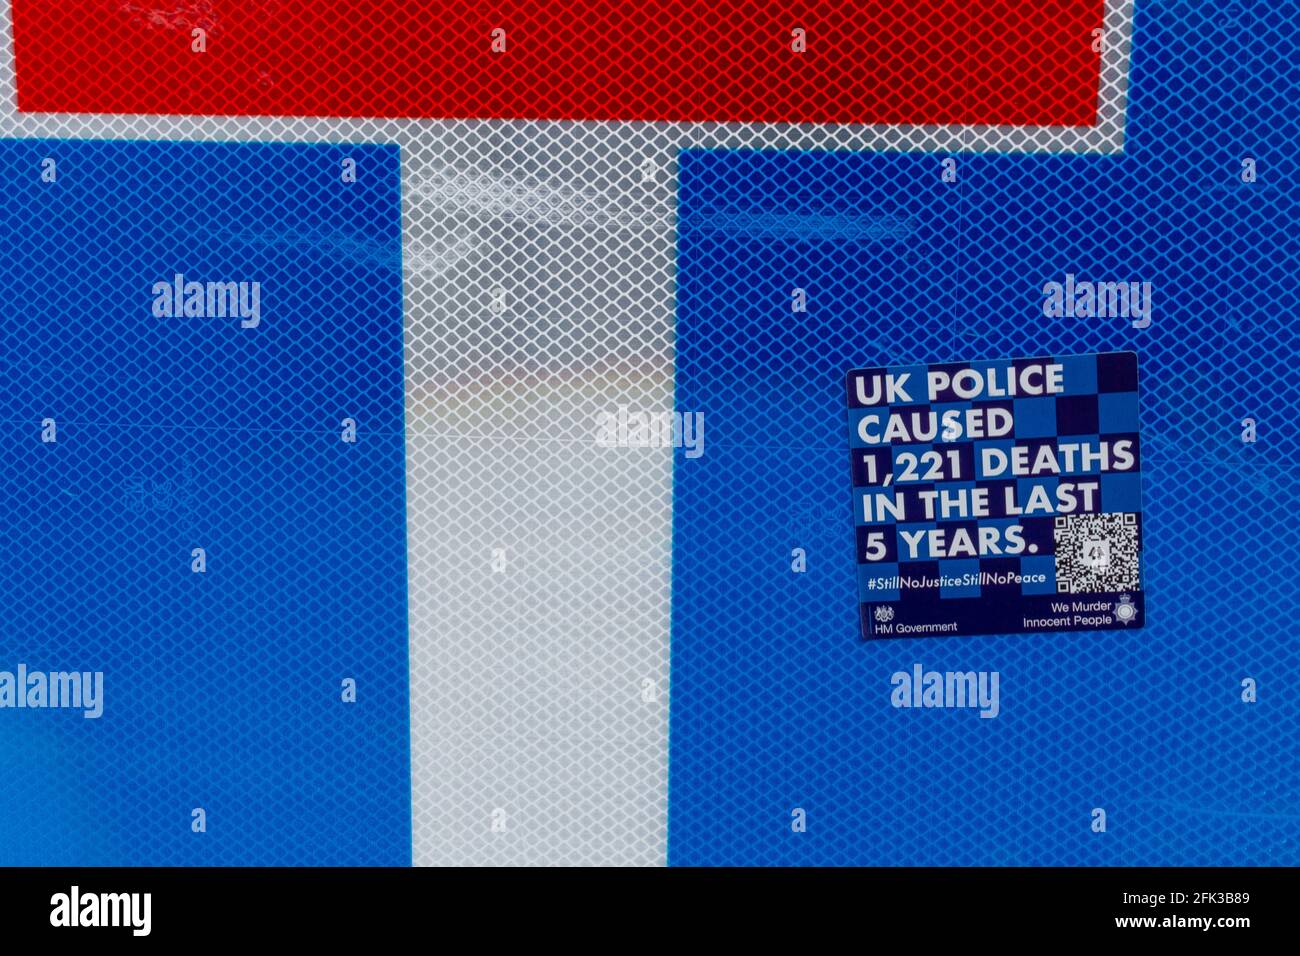 A blue anti-police sticker on a road sign claiming the UK police caused 1221 deaths in the last five years. Stock Photo